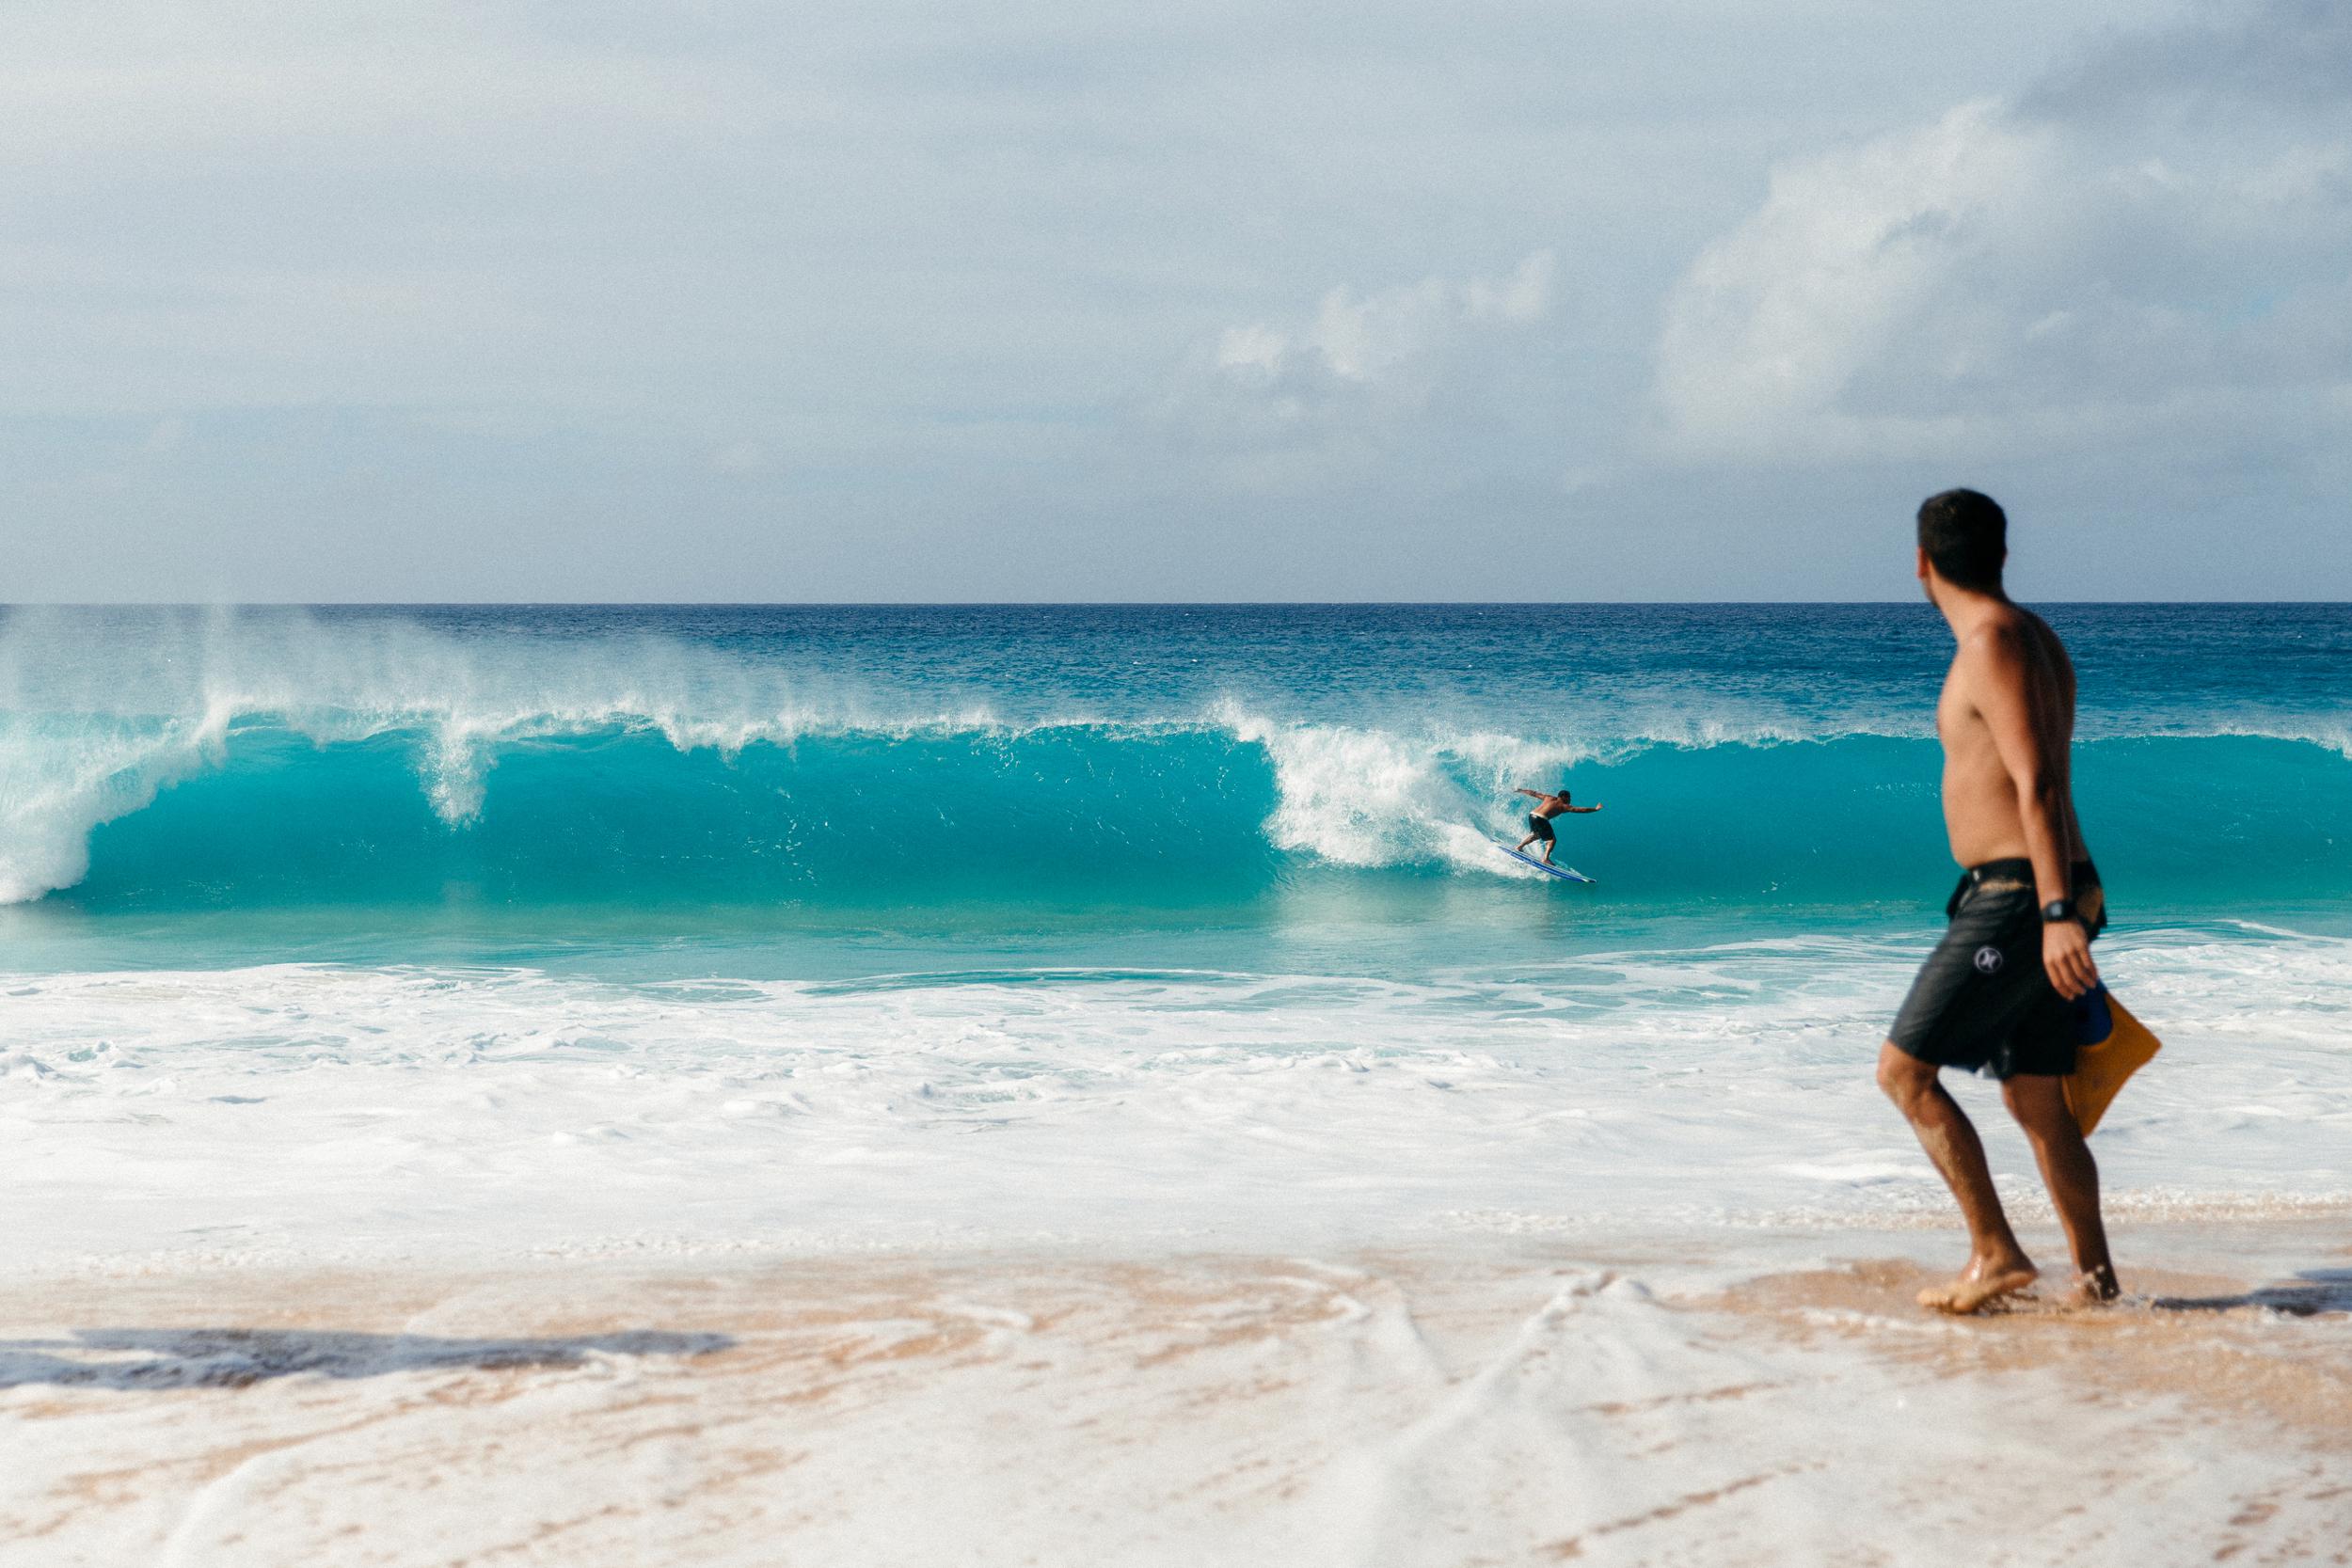 Oahu Documentary Photographs of Surfing, Hiking, Snorkeling